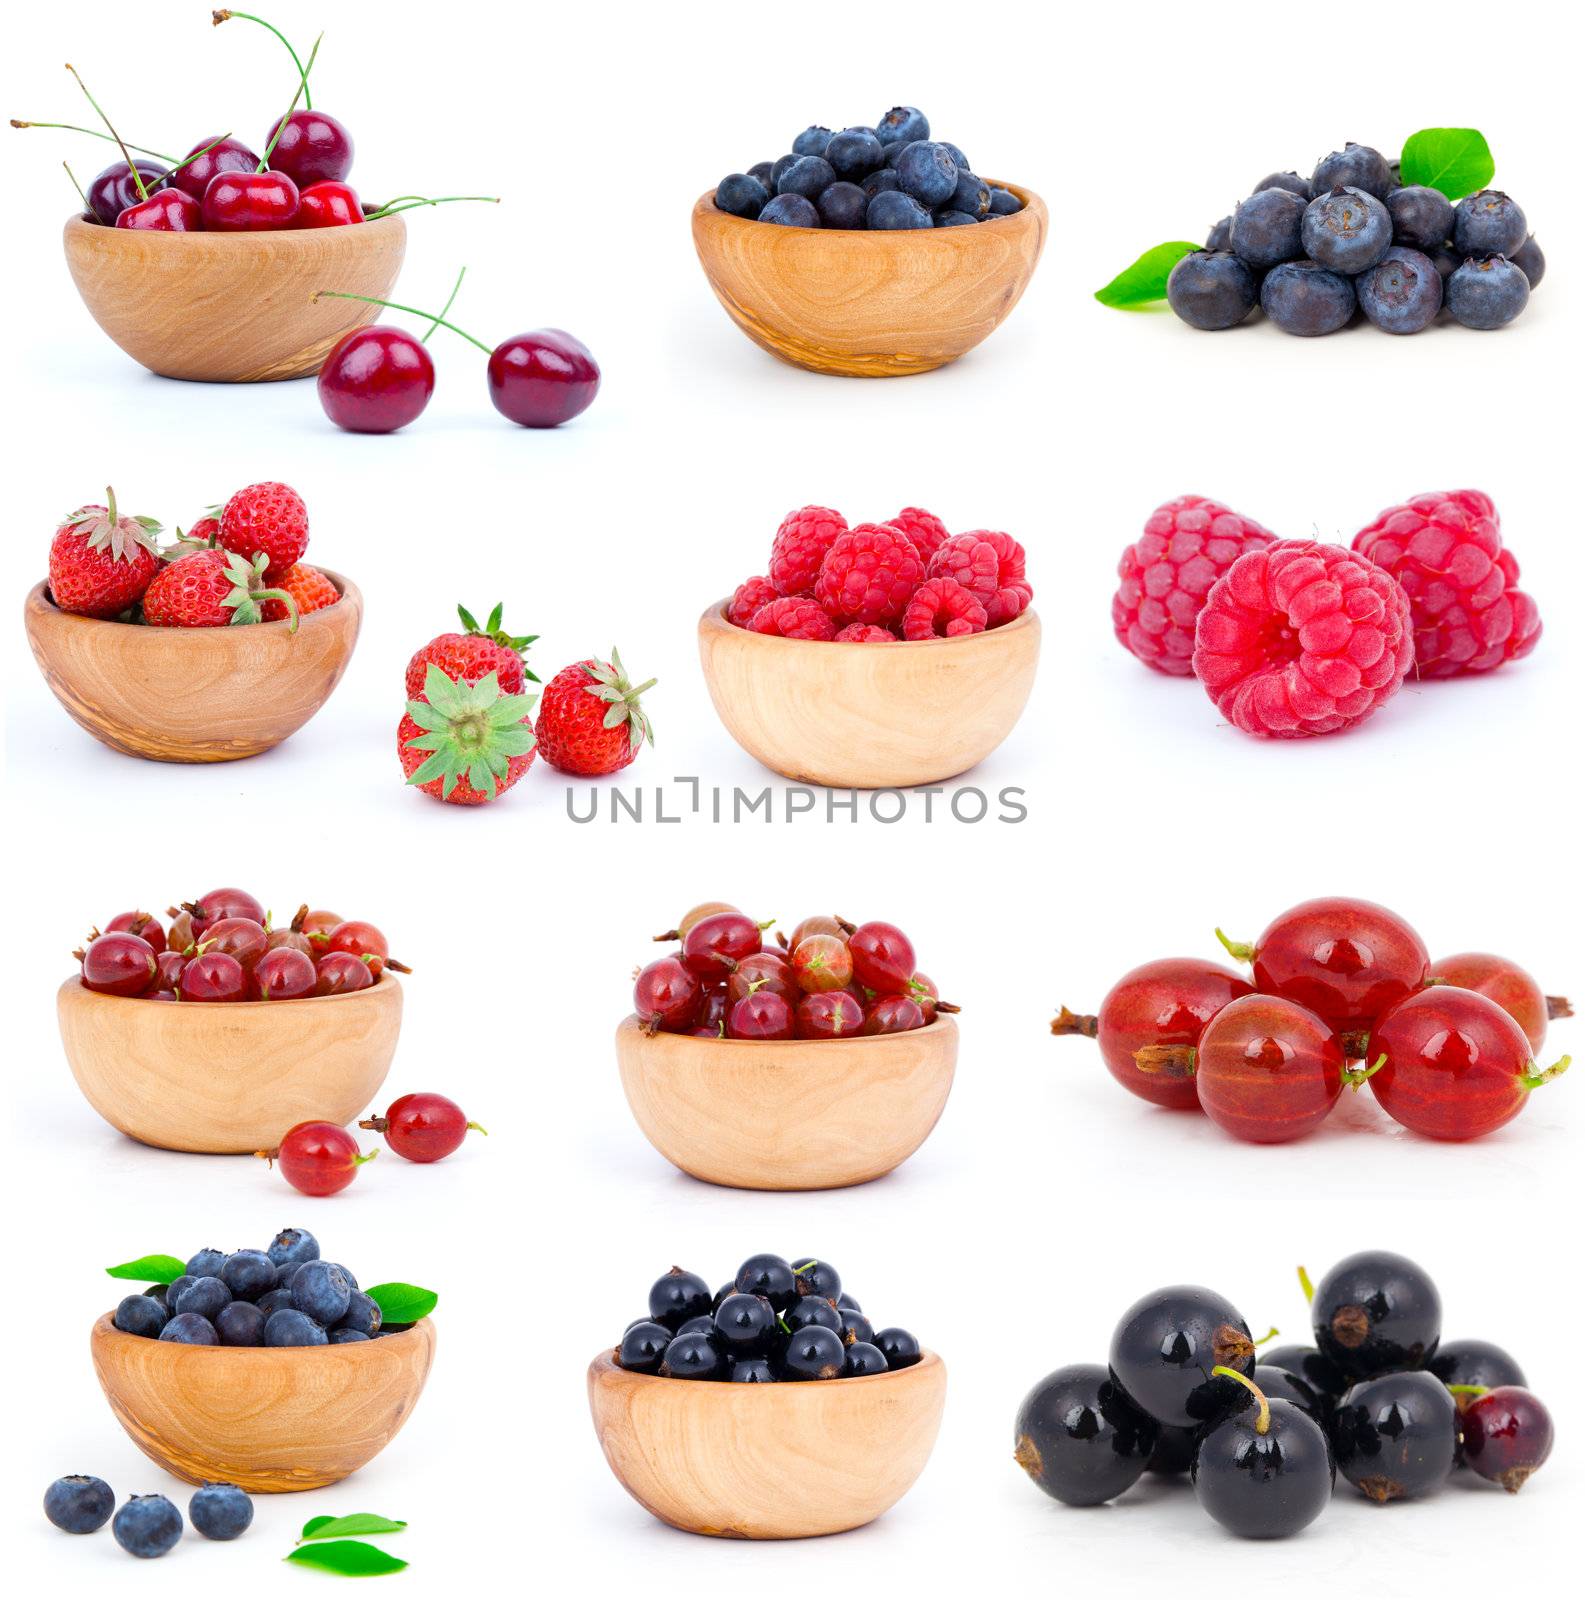 set of fresh strawberry, Blueberries, Raspberries, cherry, gooseberries and blackcurrants in a wooden bowl, over a white background.